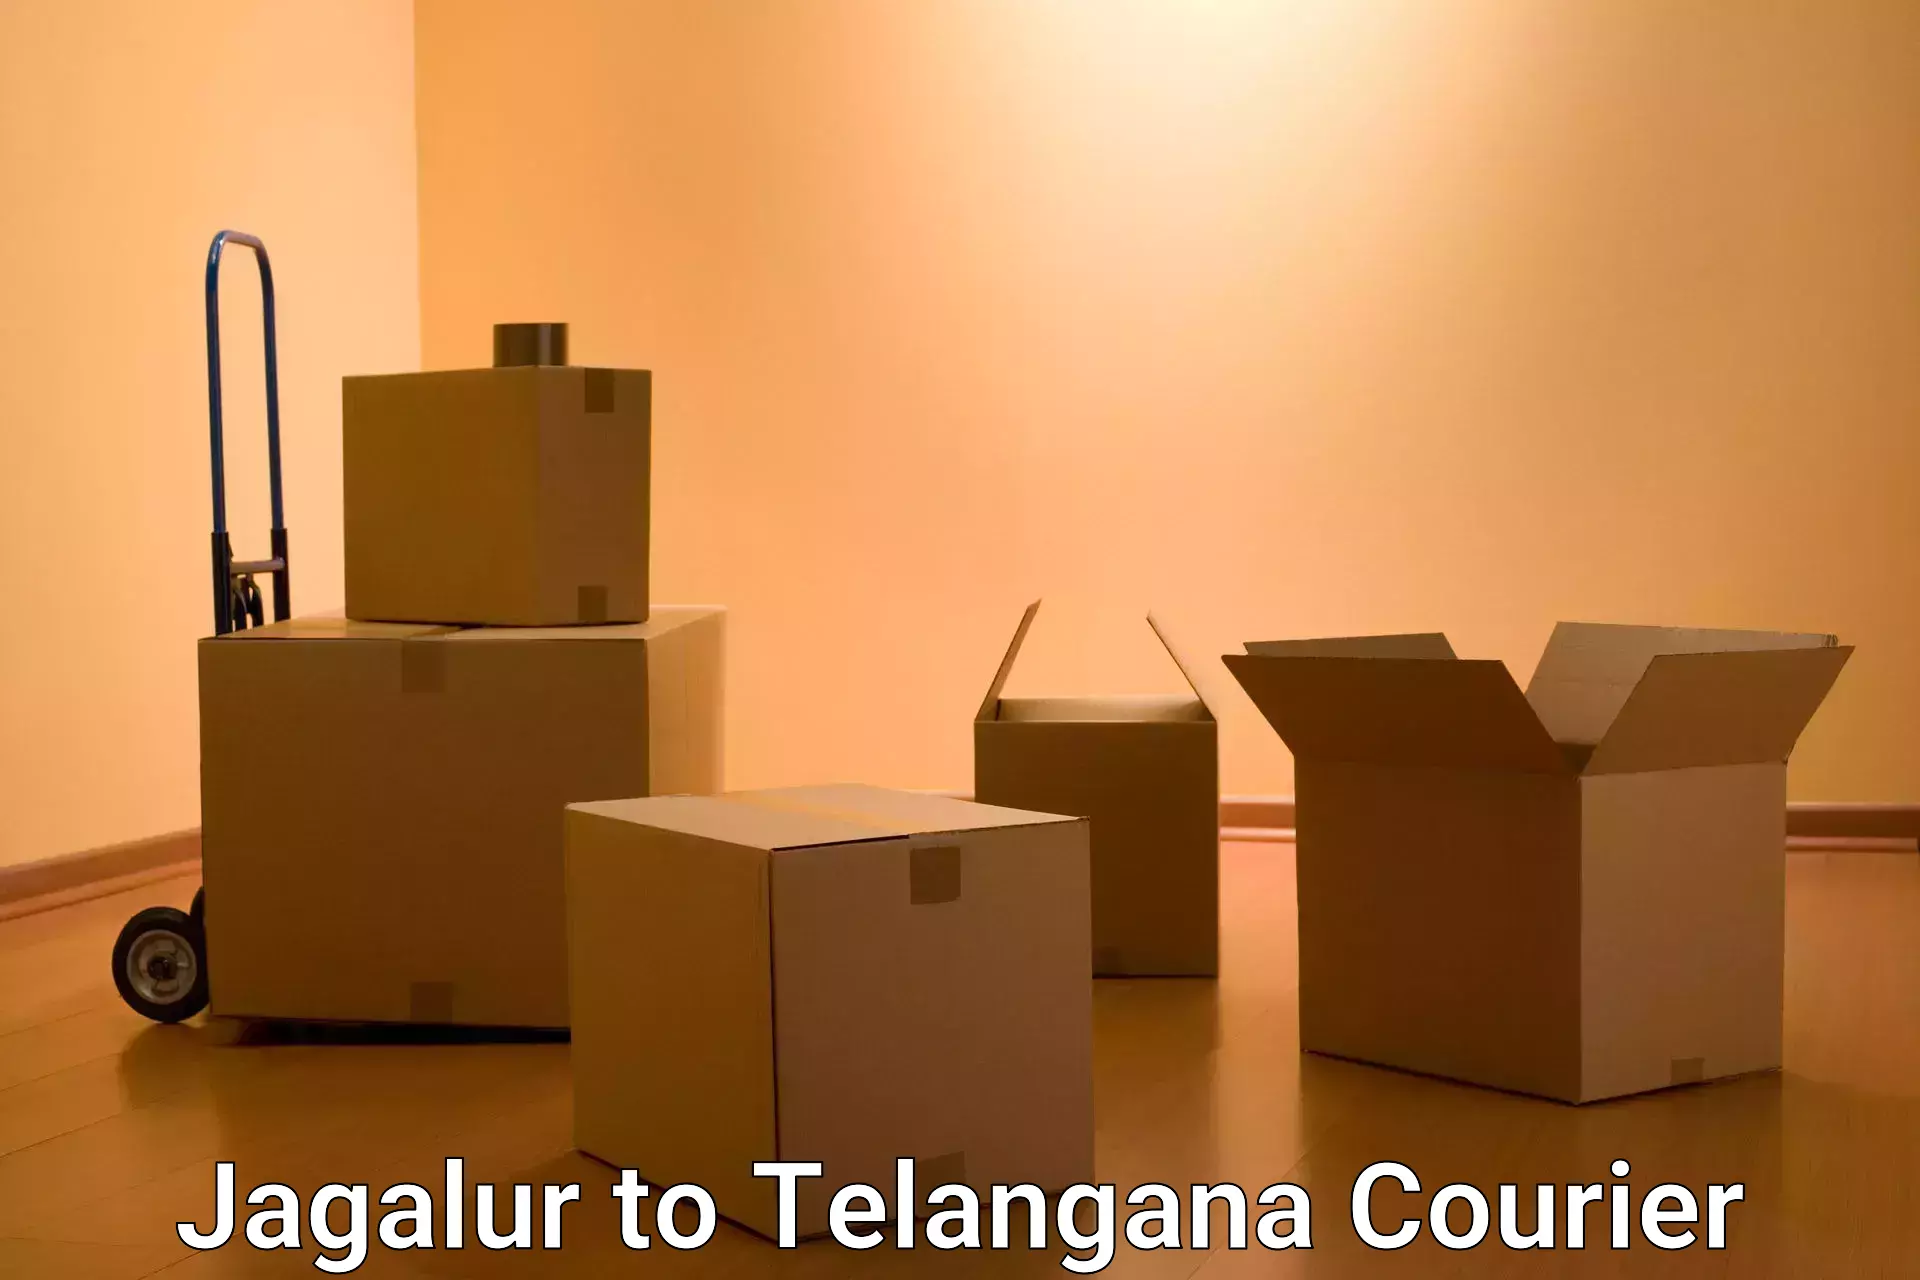 Reliable parcel services Jagalur to Husnabad